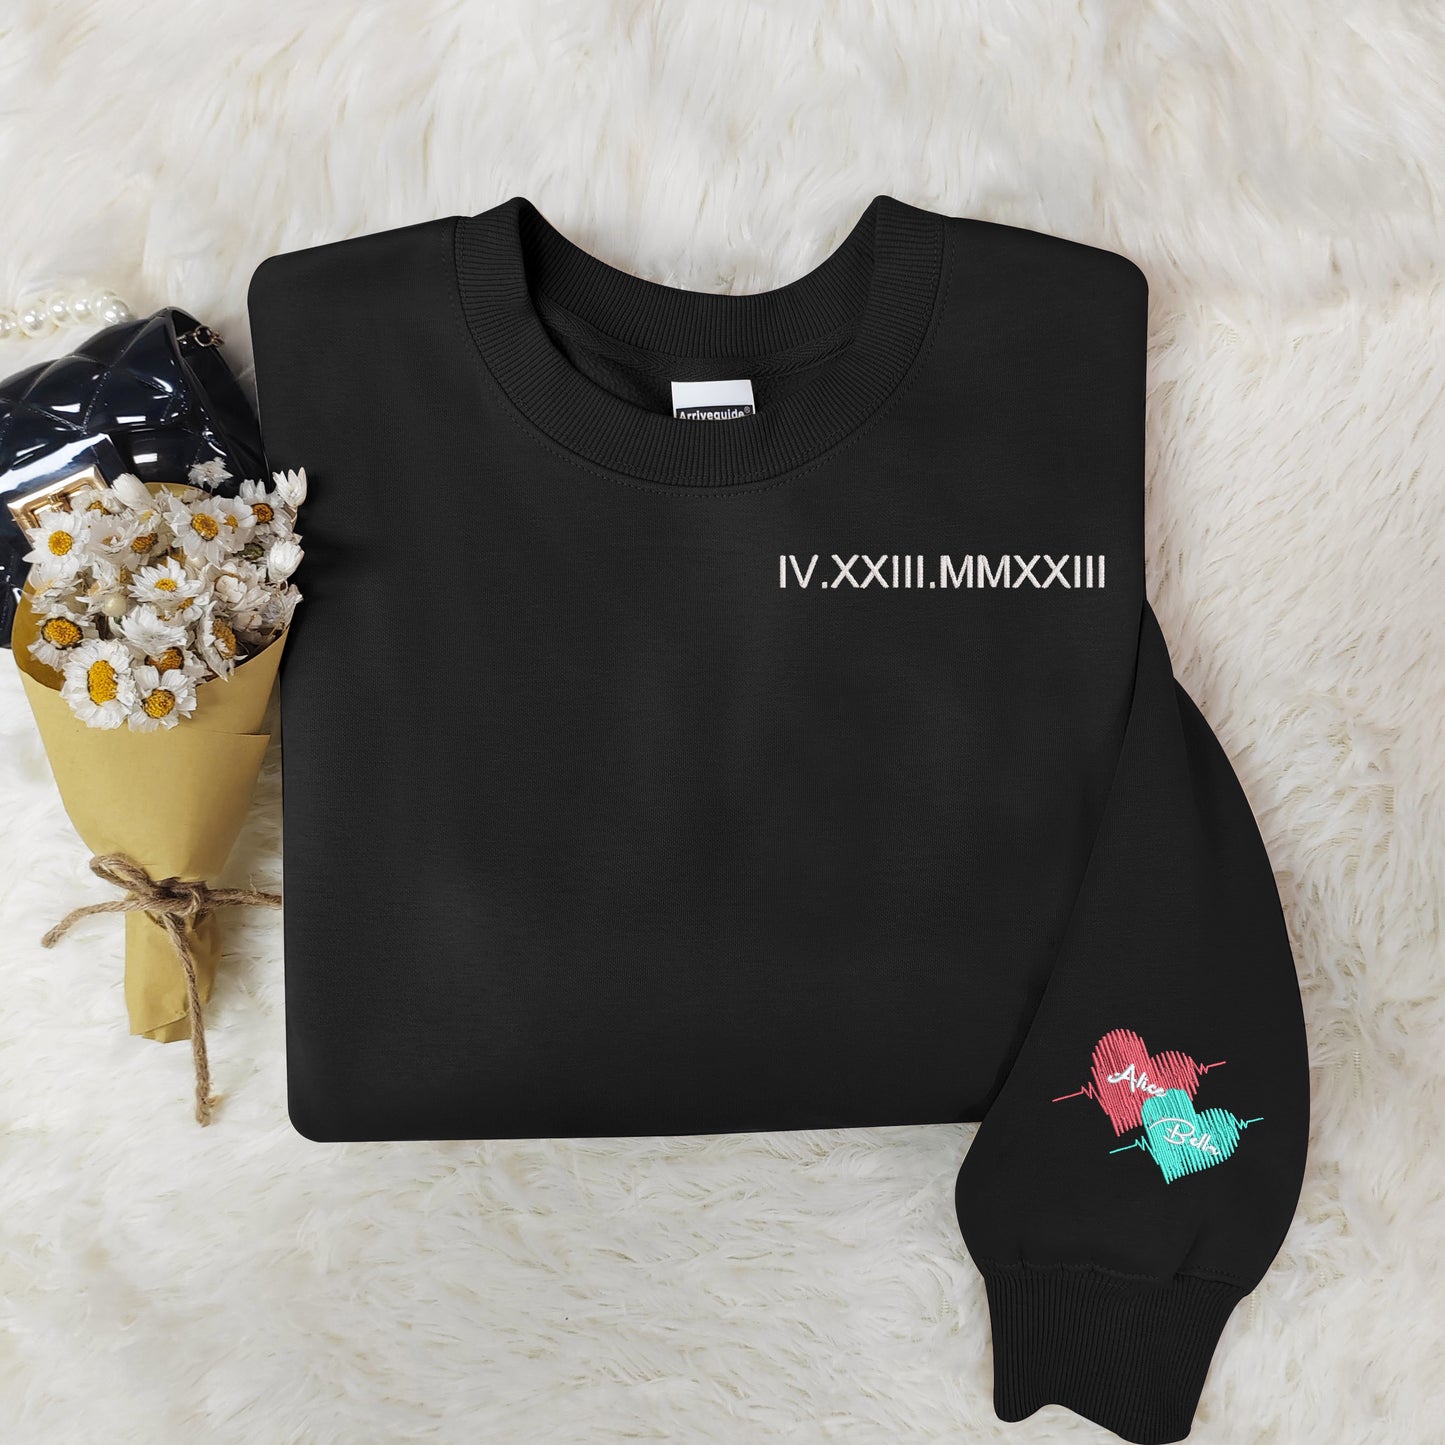 Customized Roman numeral embroidered sweatshirts for couples, with the couple’s names embroidered on the cuffs.